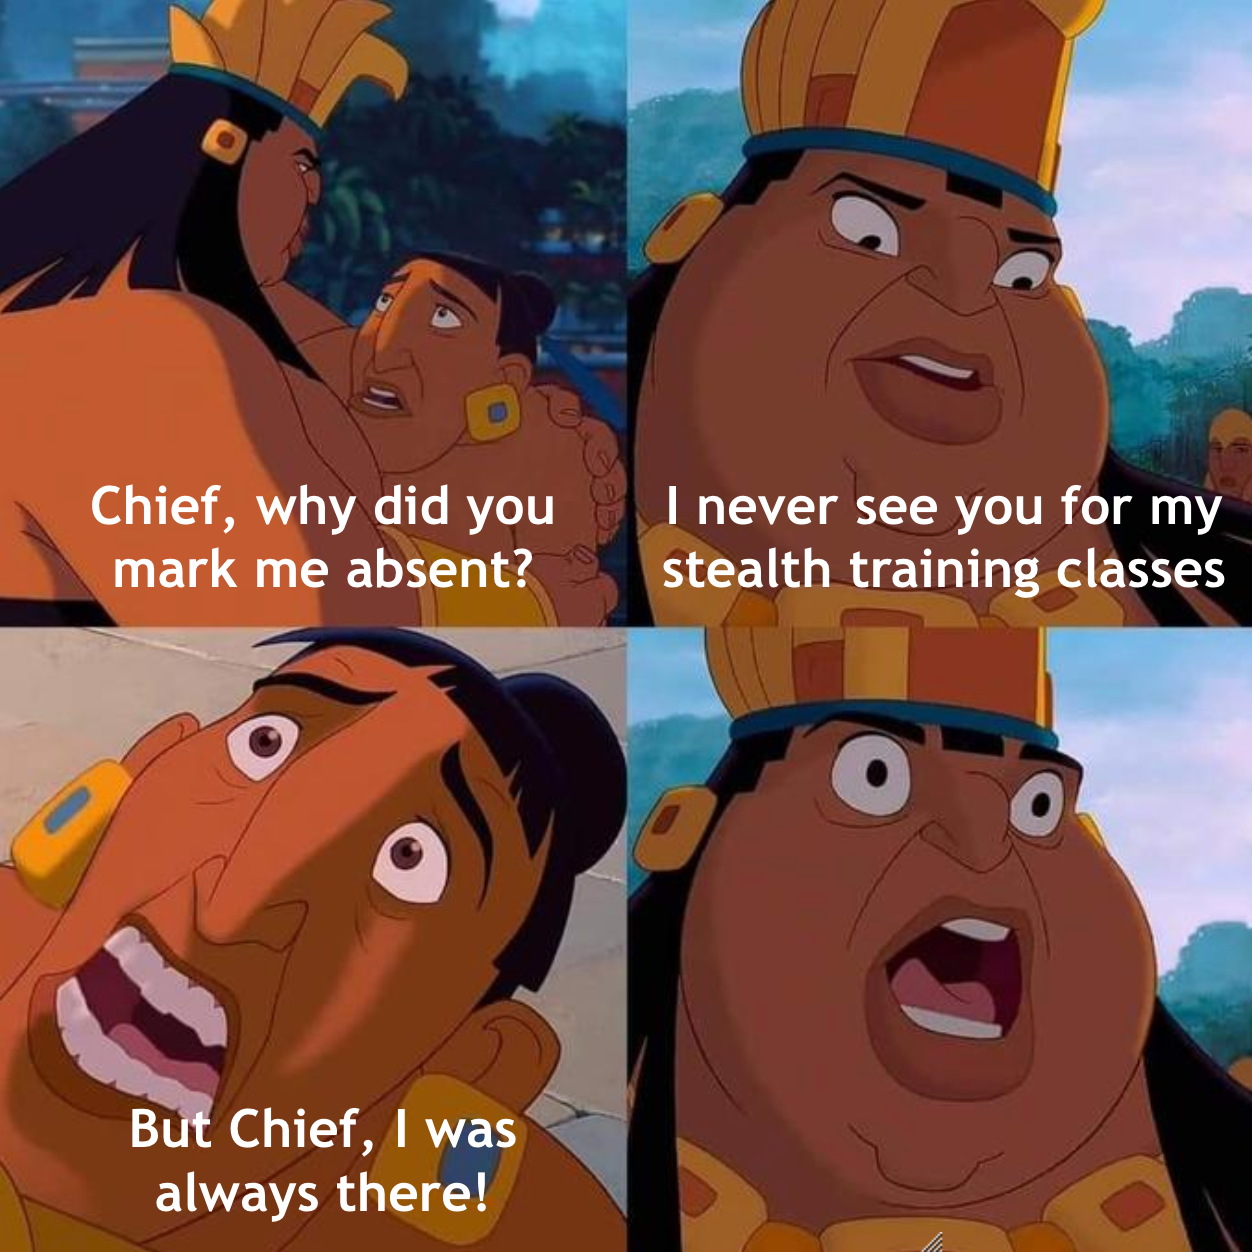 funny memes - dank memes - kirby's the police meme - Chief, why did you mark me absent? But Chief, I was always there! I never see you for my stealth training classes